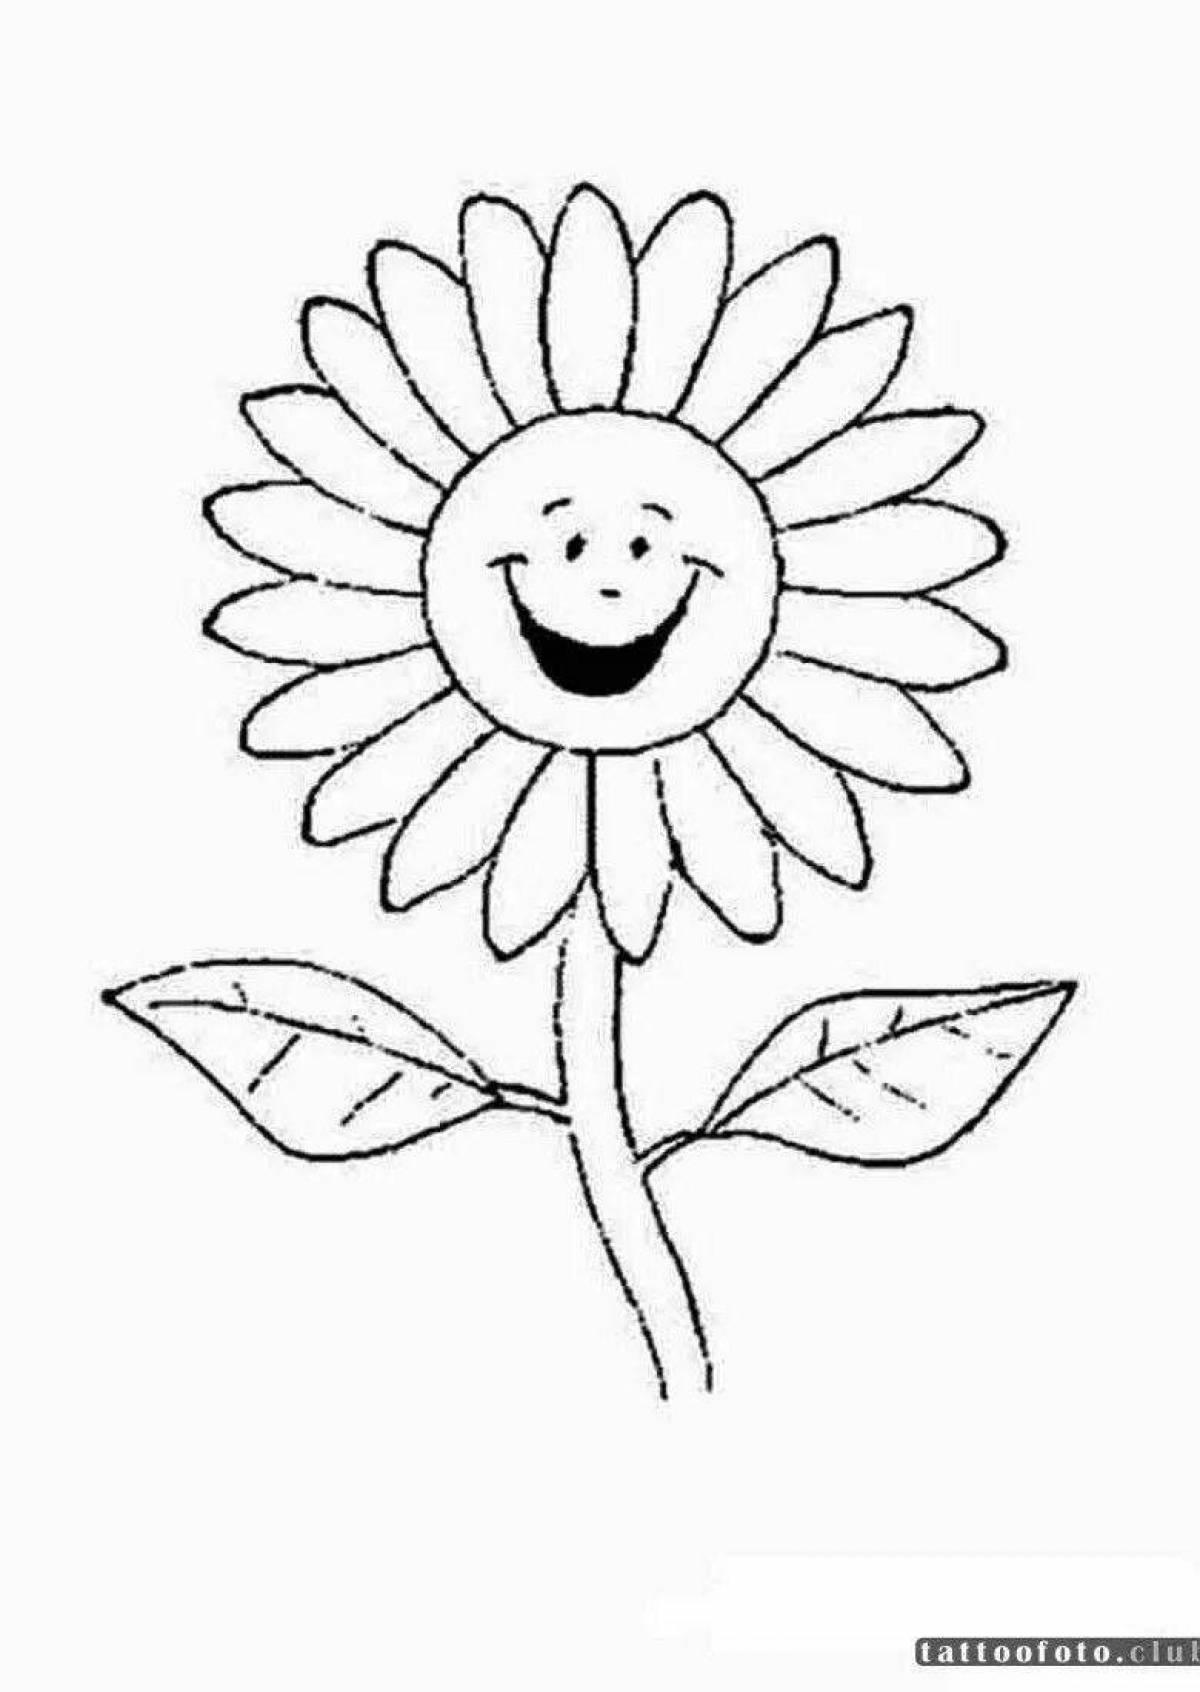 Coloring book shining chamomile flower for children